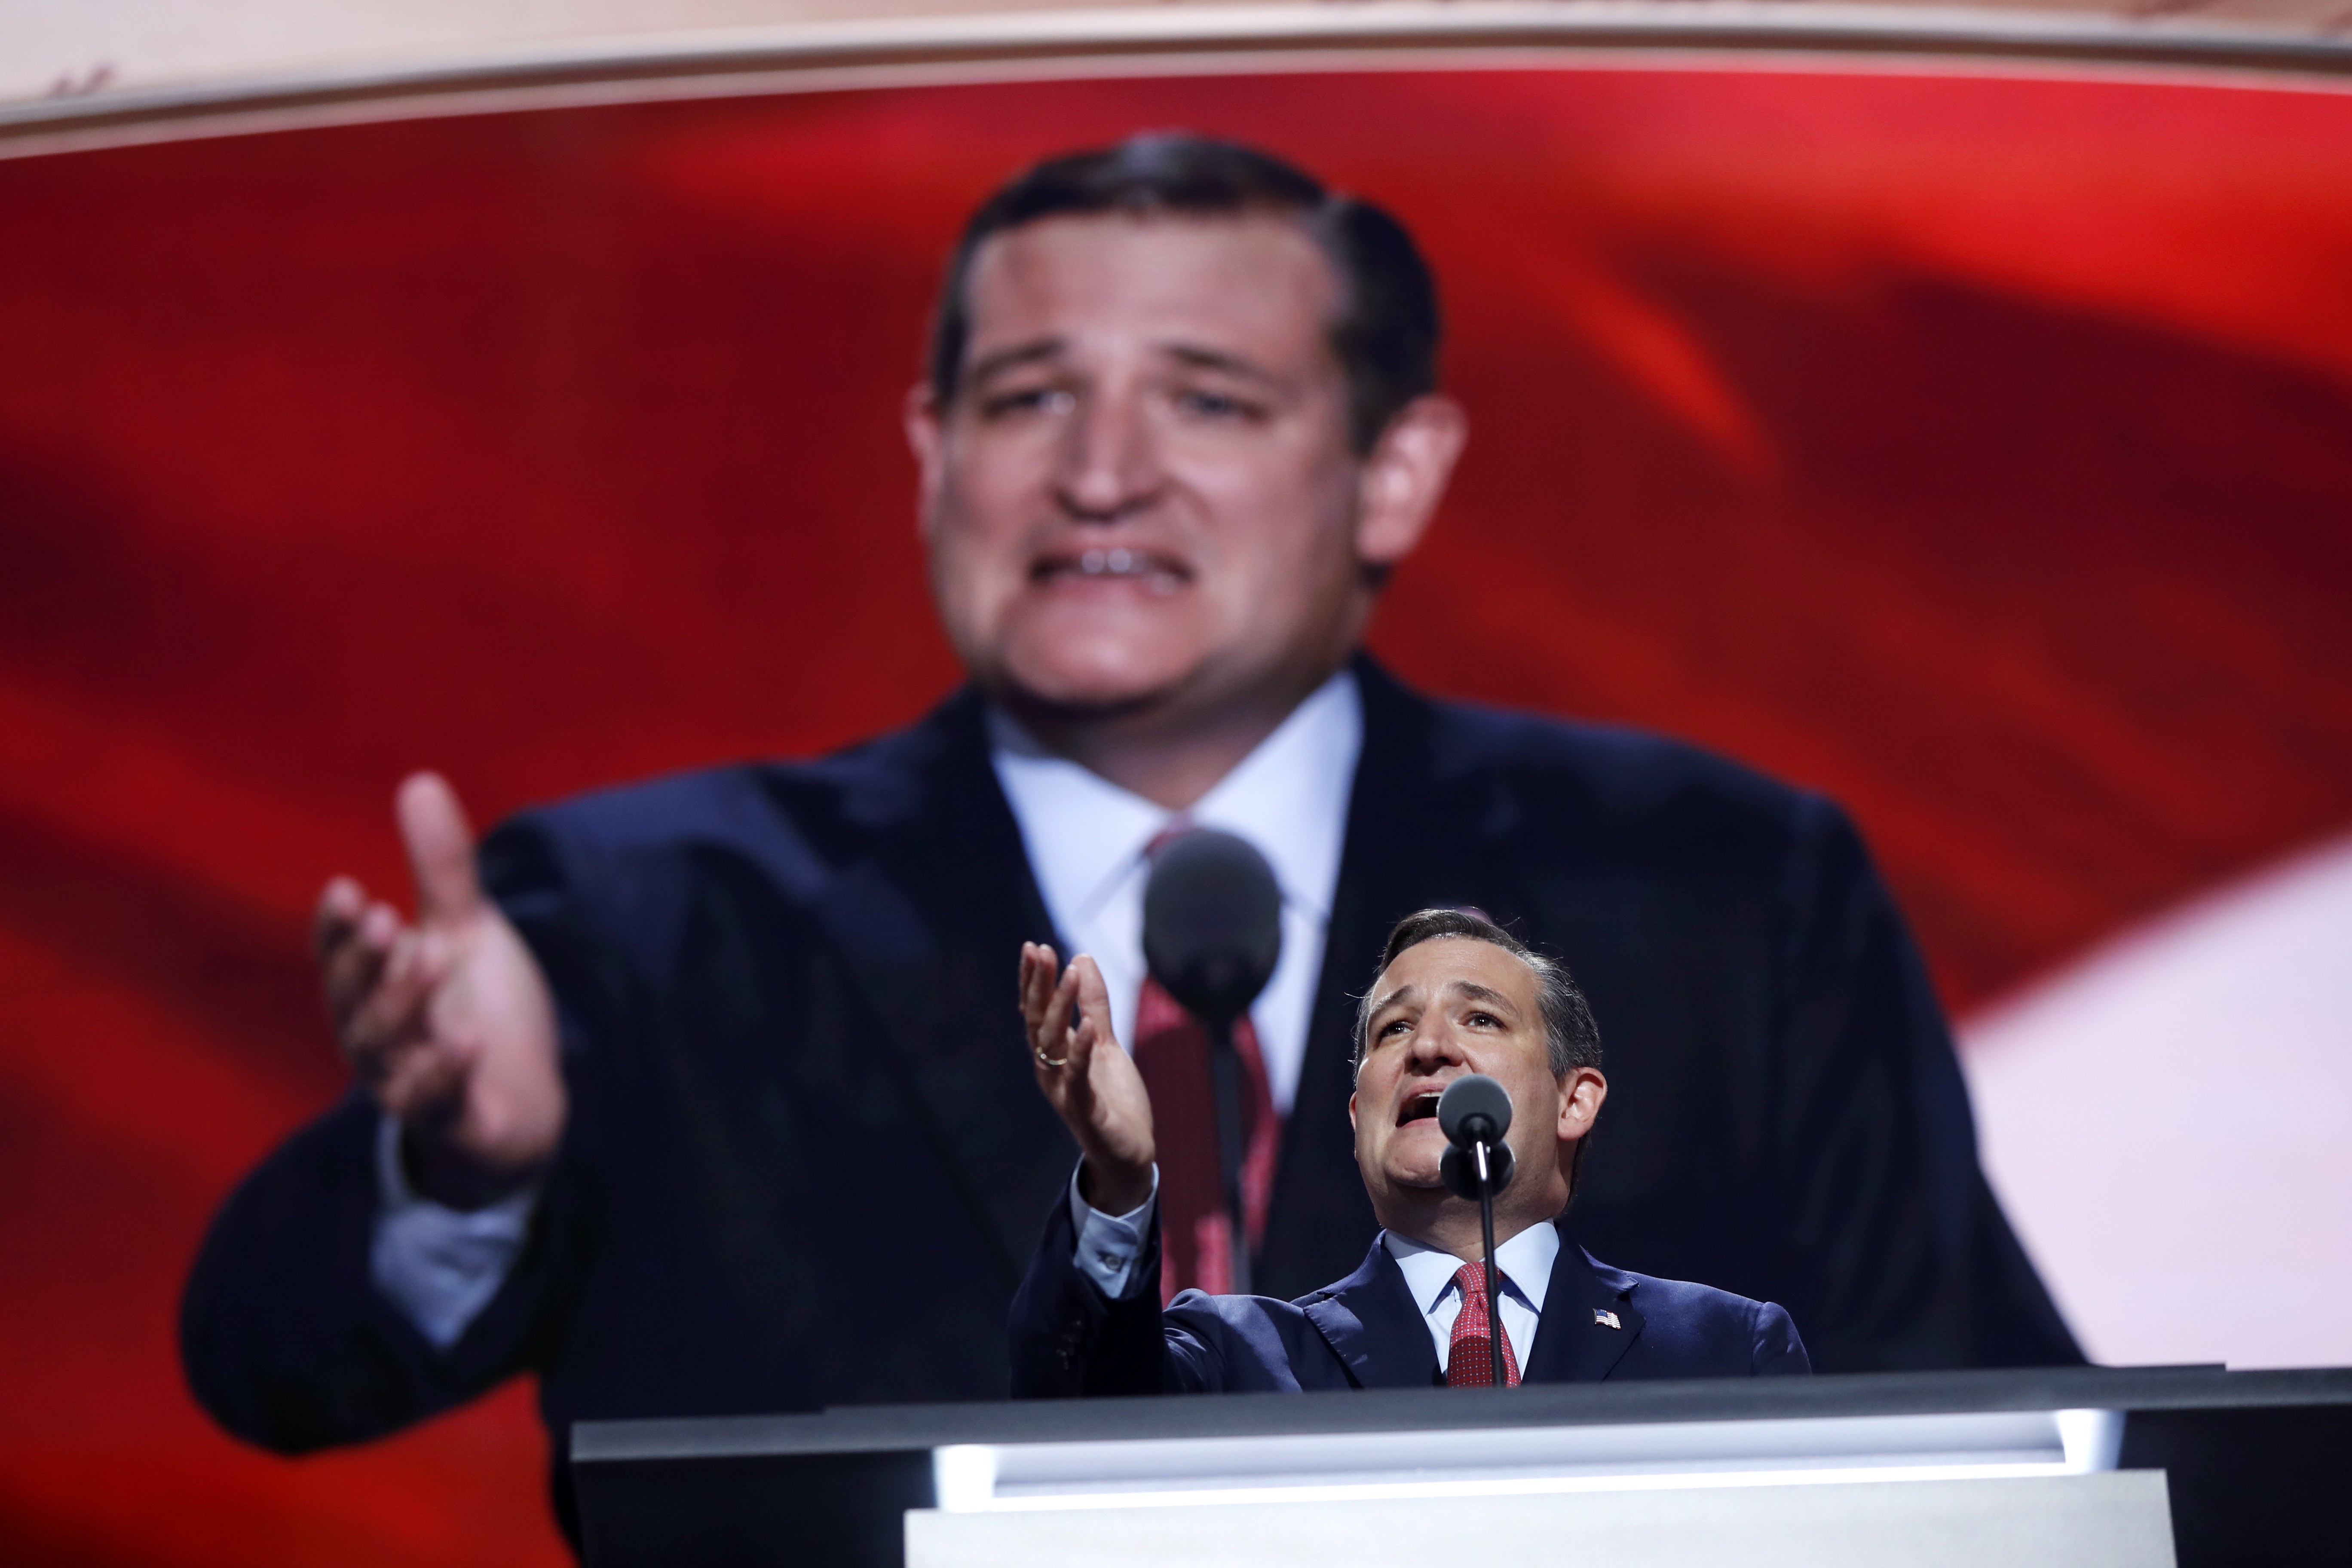 Ted Cruz is likely gearing up to run for president again.